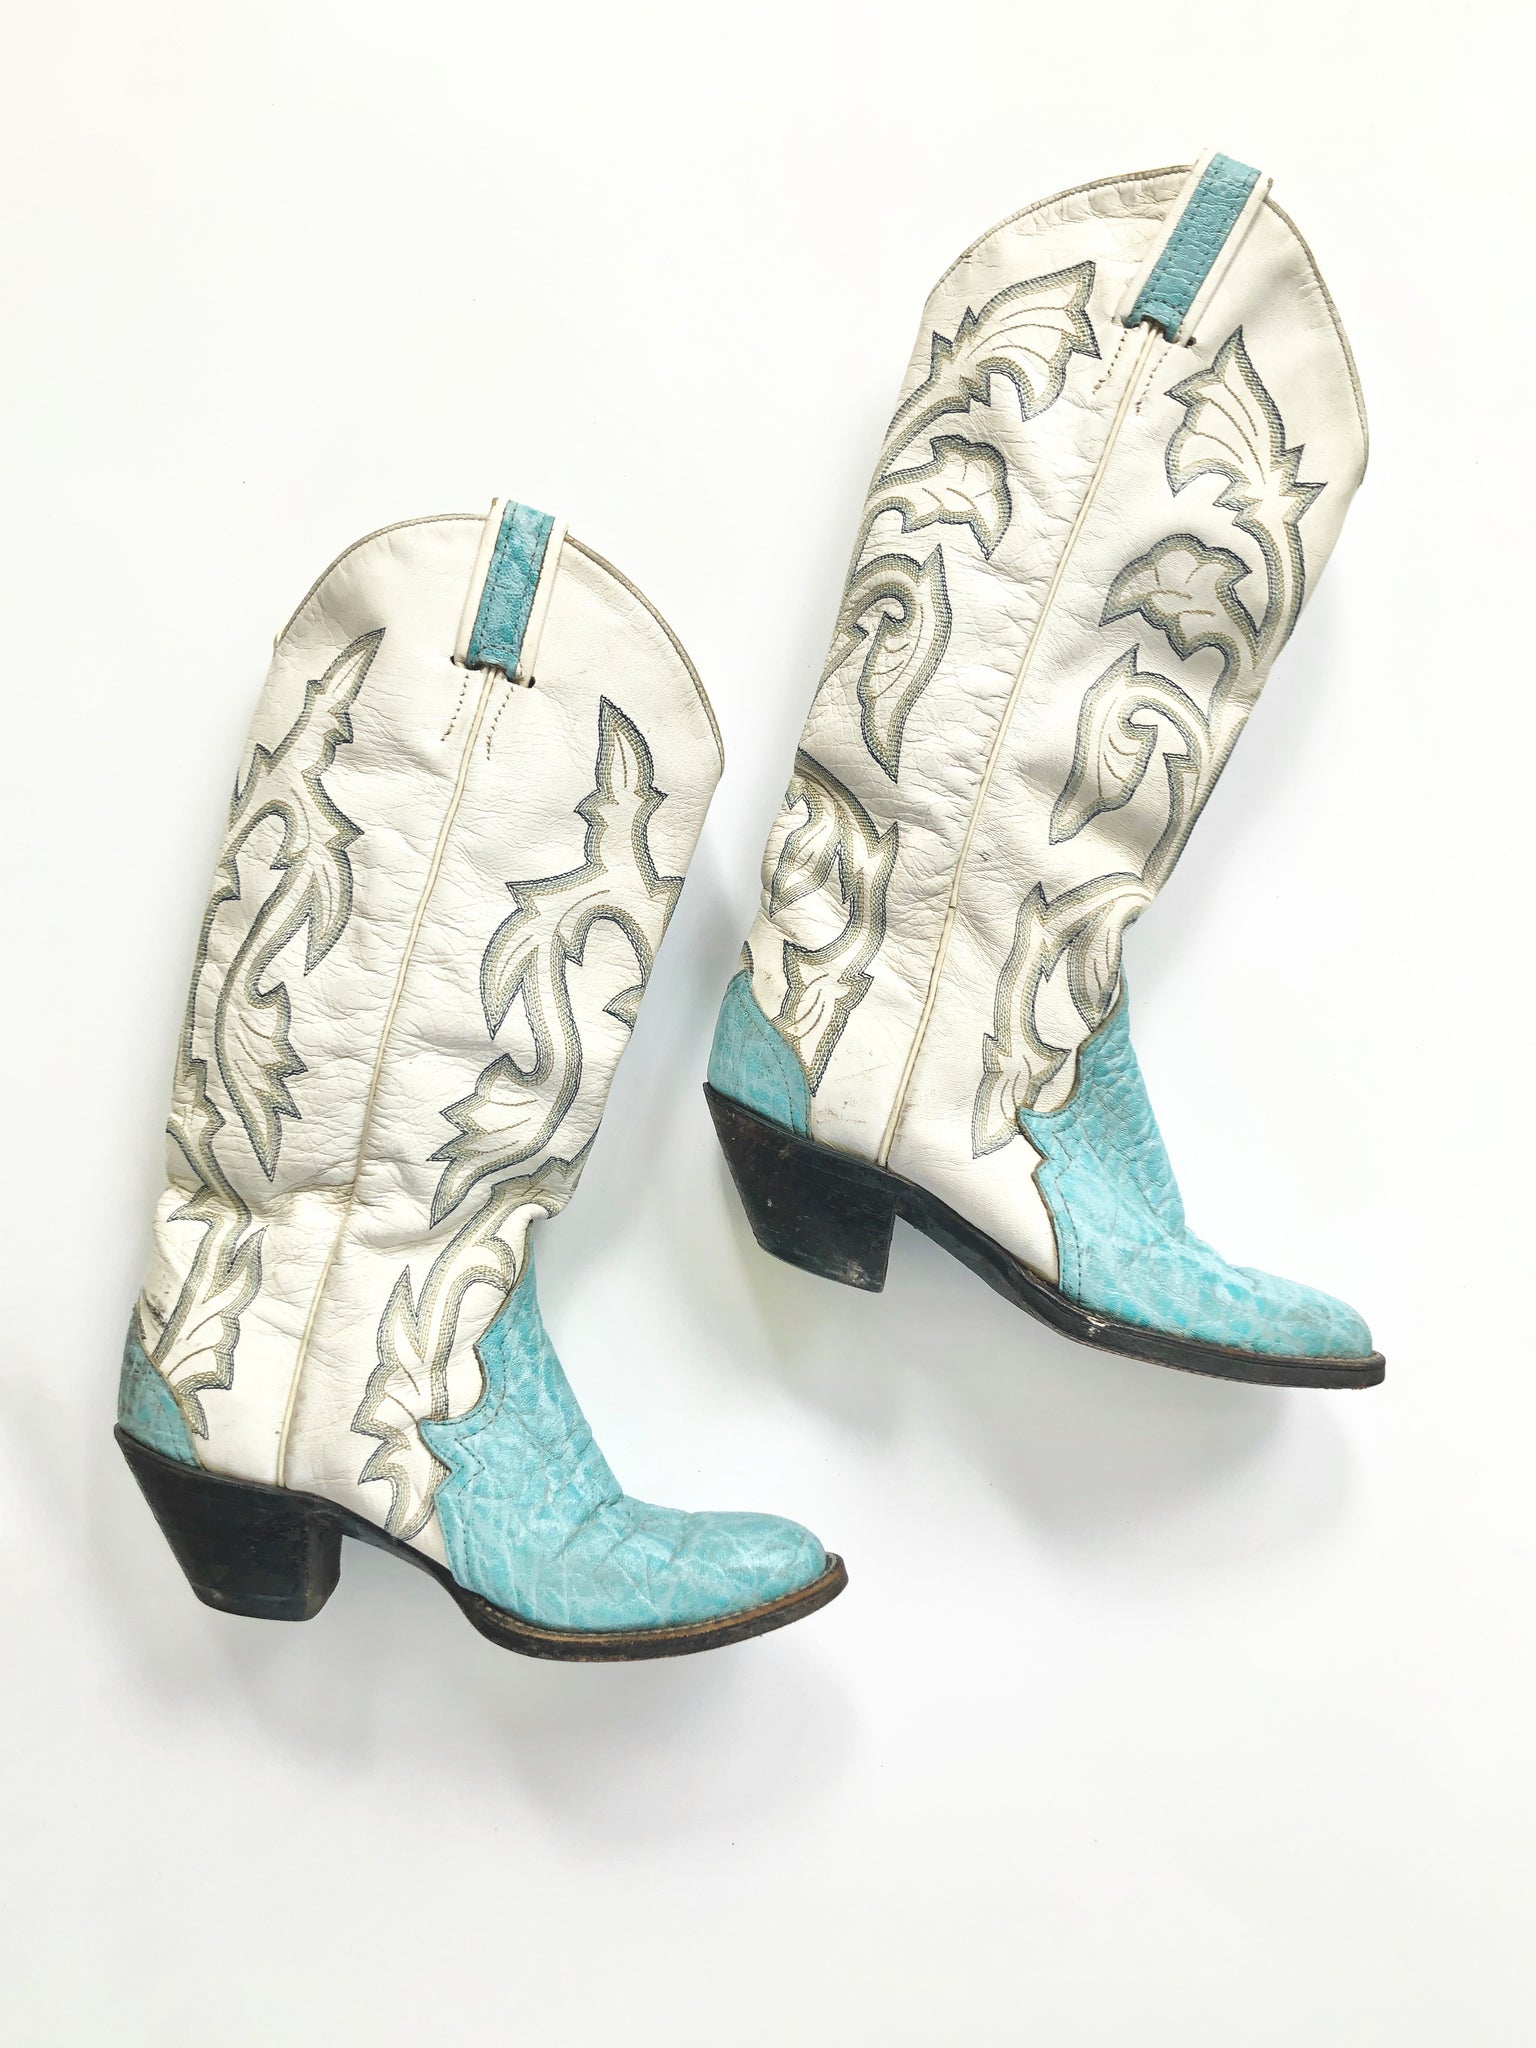 VINTAGE: Baby Blue & White Leather Cowboy Boots